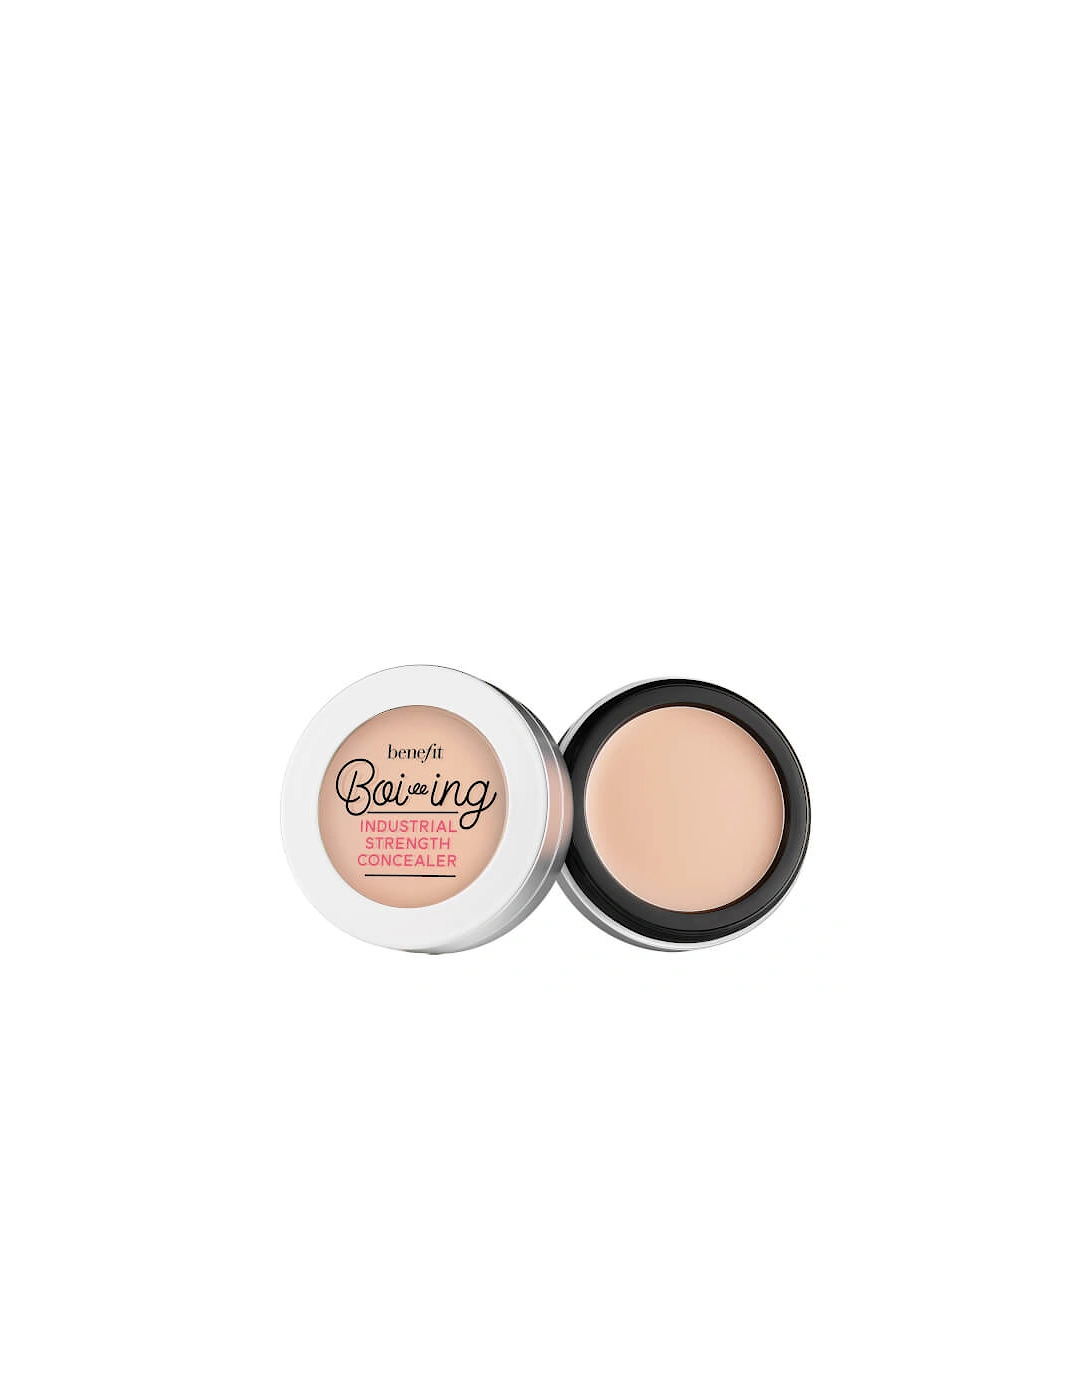 Boi-ing Industrial Strength Concealer Shade 01, 2 of 1